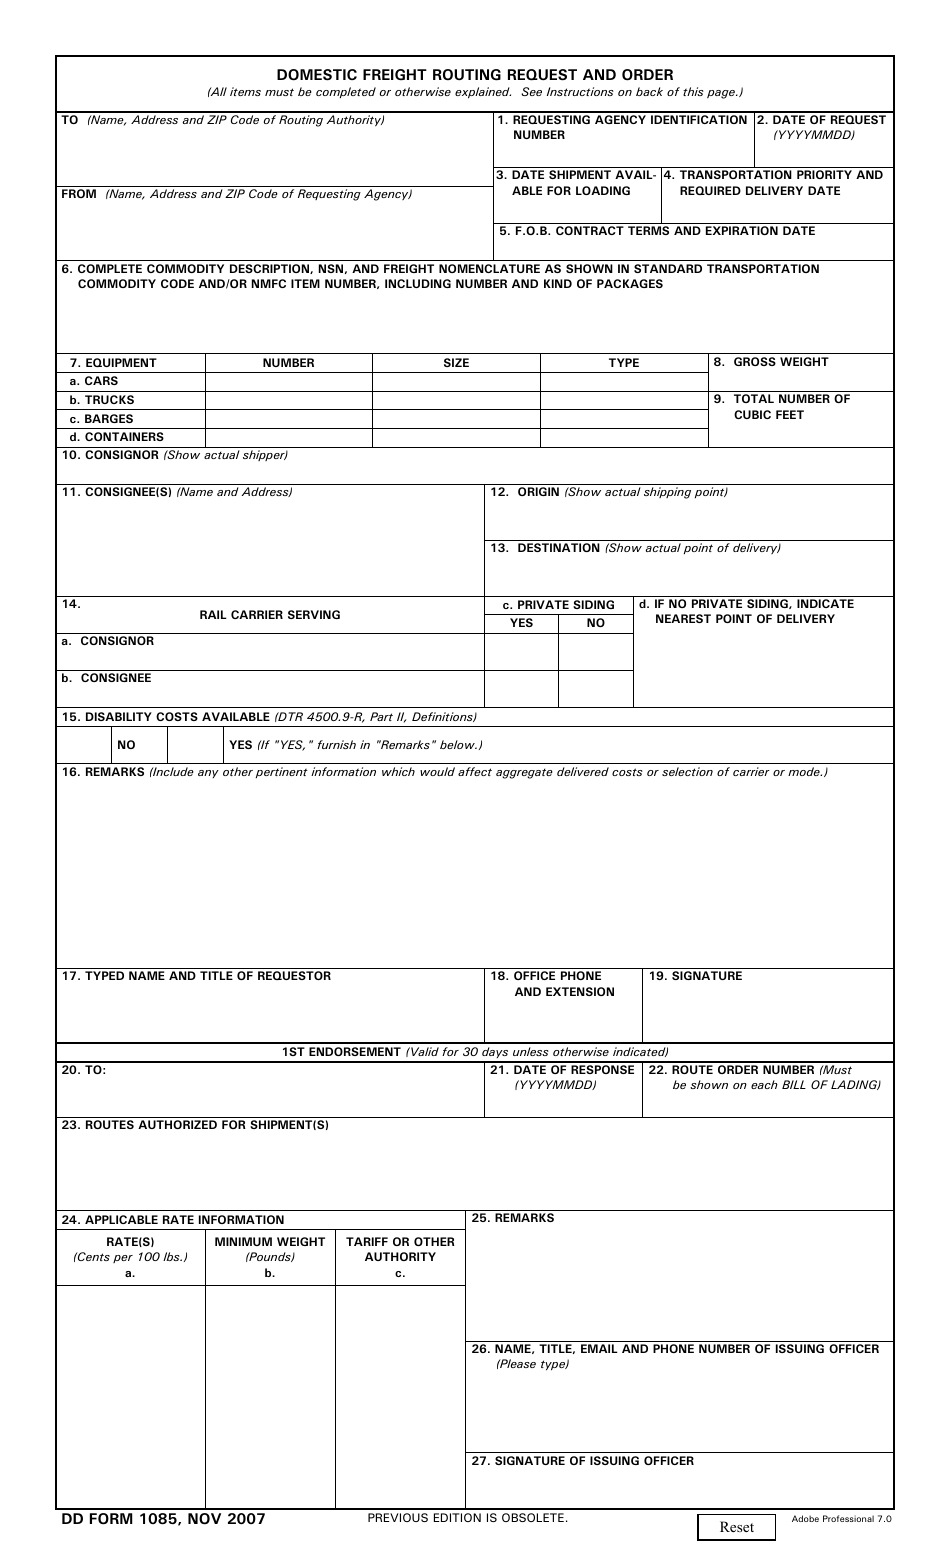 DD Form 1085 Domestic Freight Routing Request and Order, Page 1